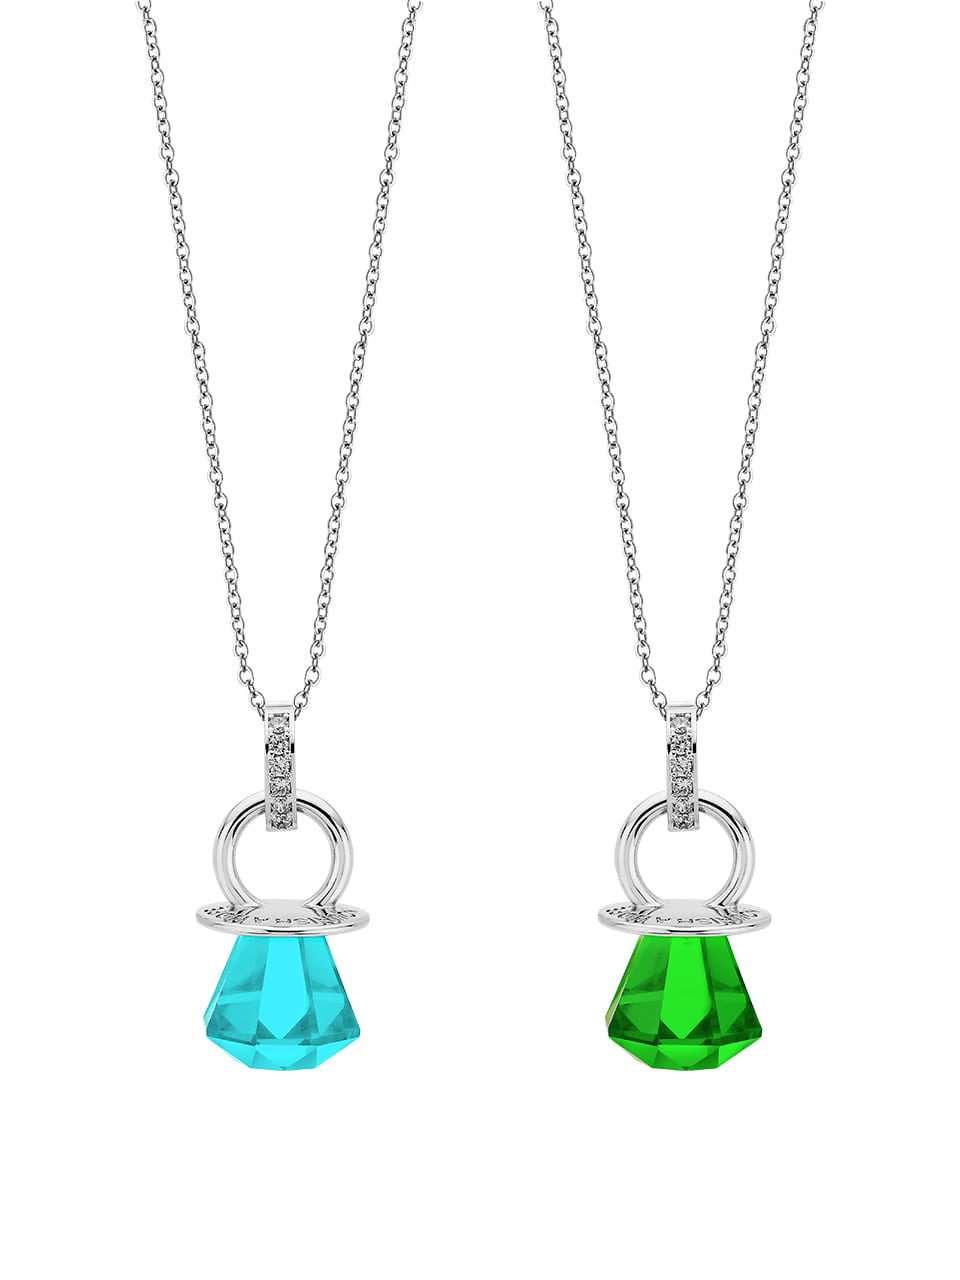 JEWEL CANDY LONG NECKLACE